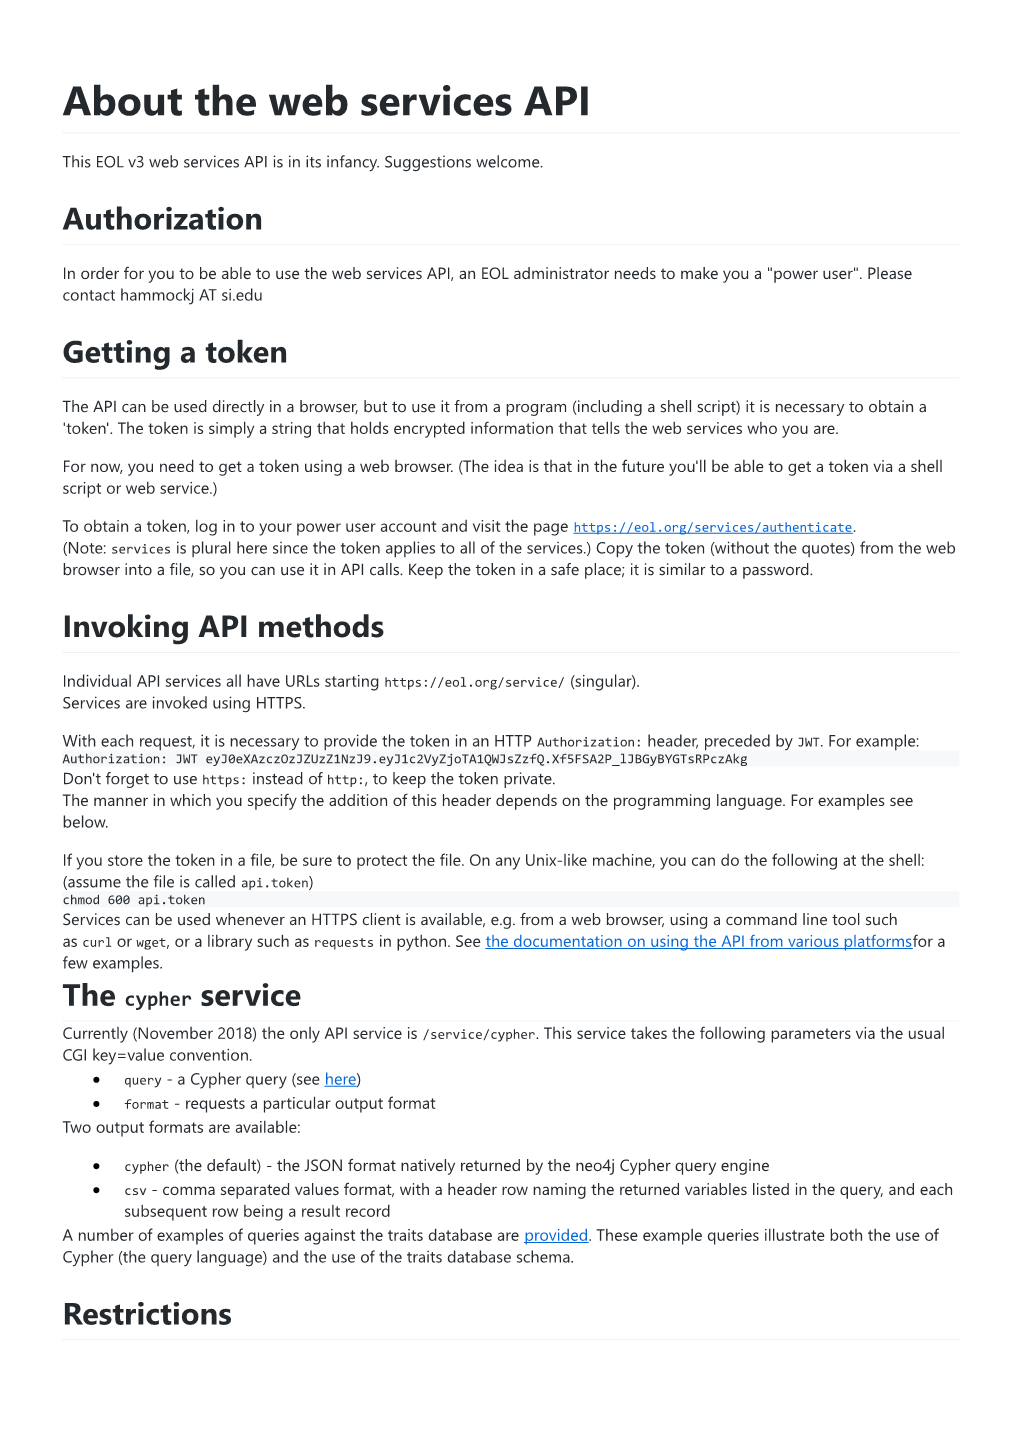 About the Web Services API